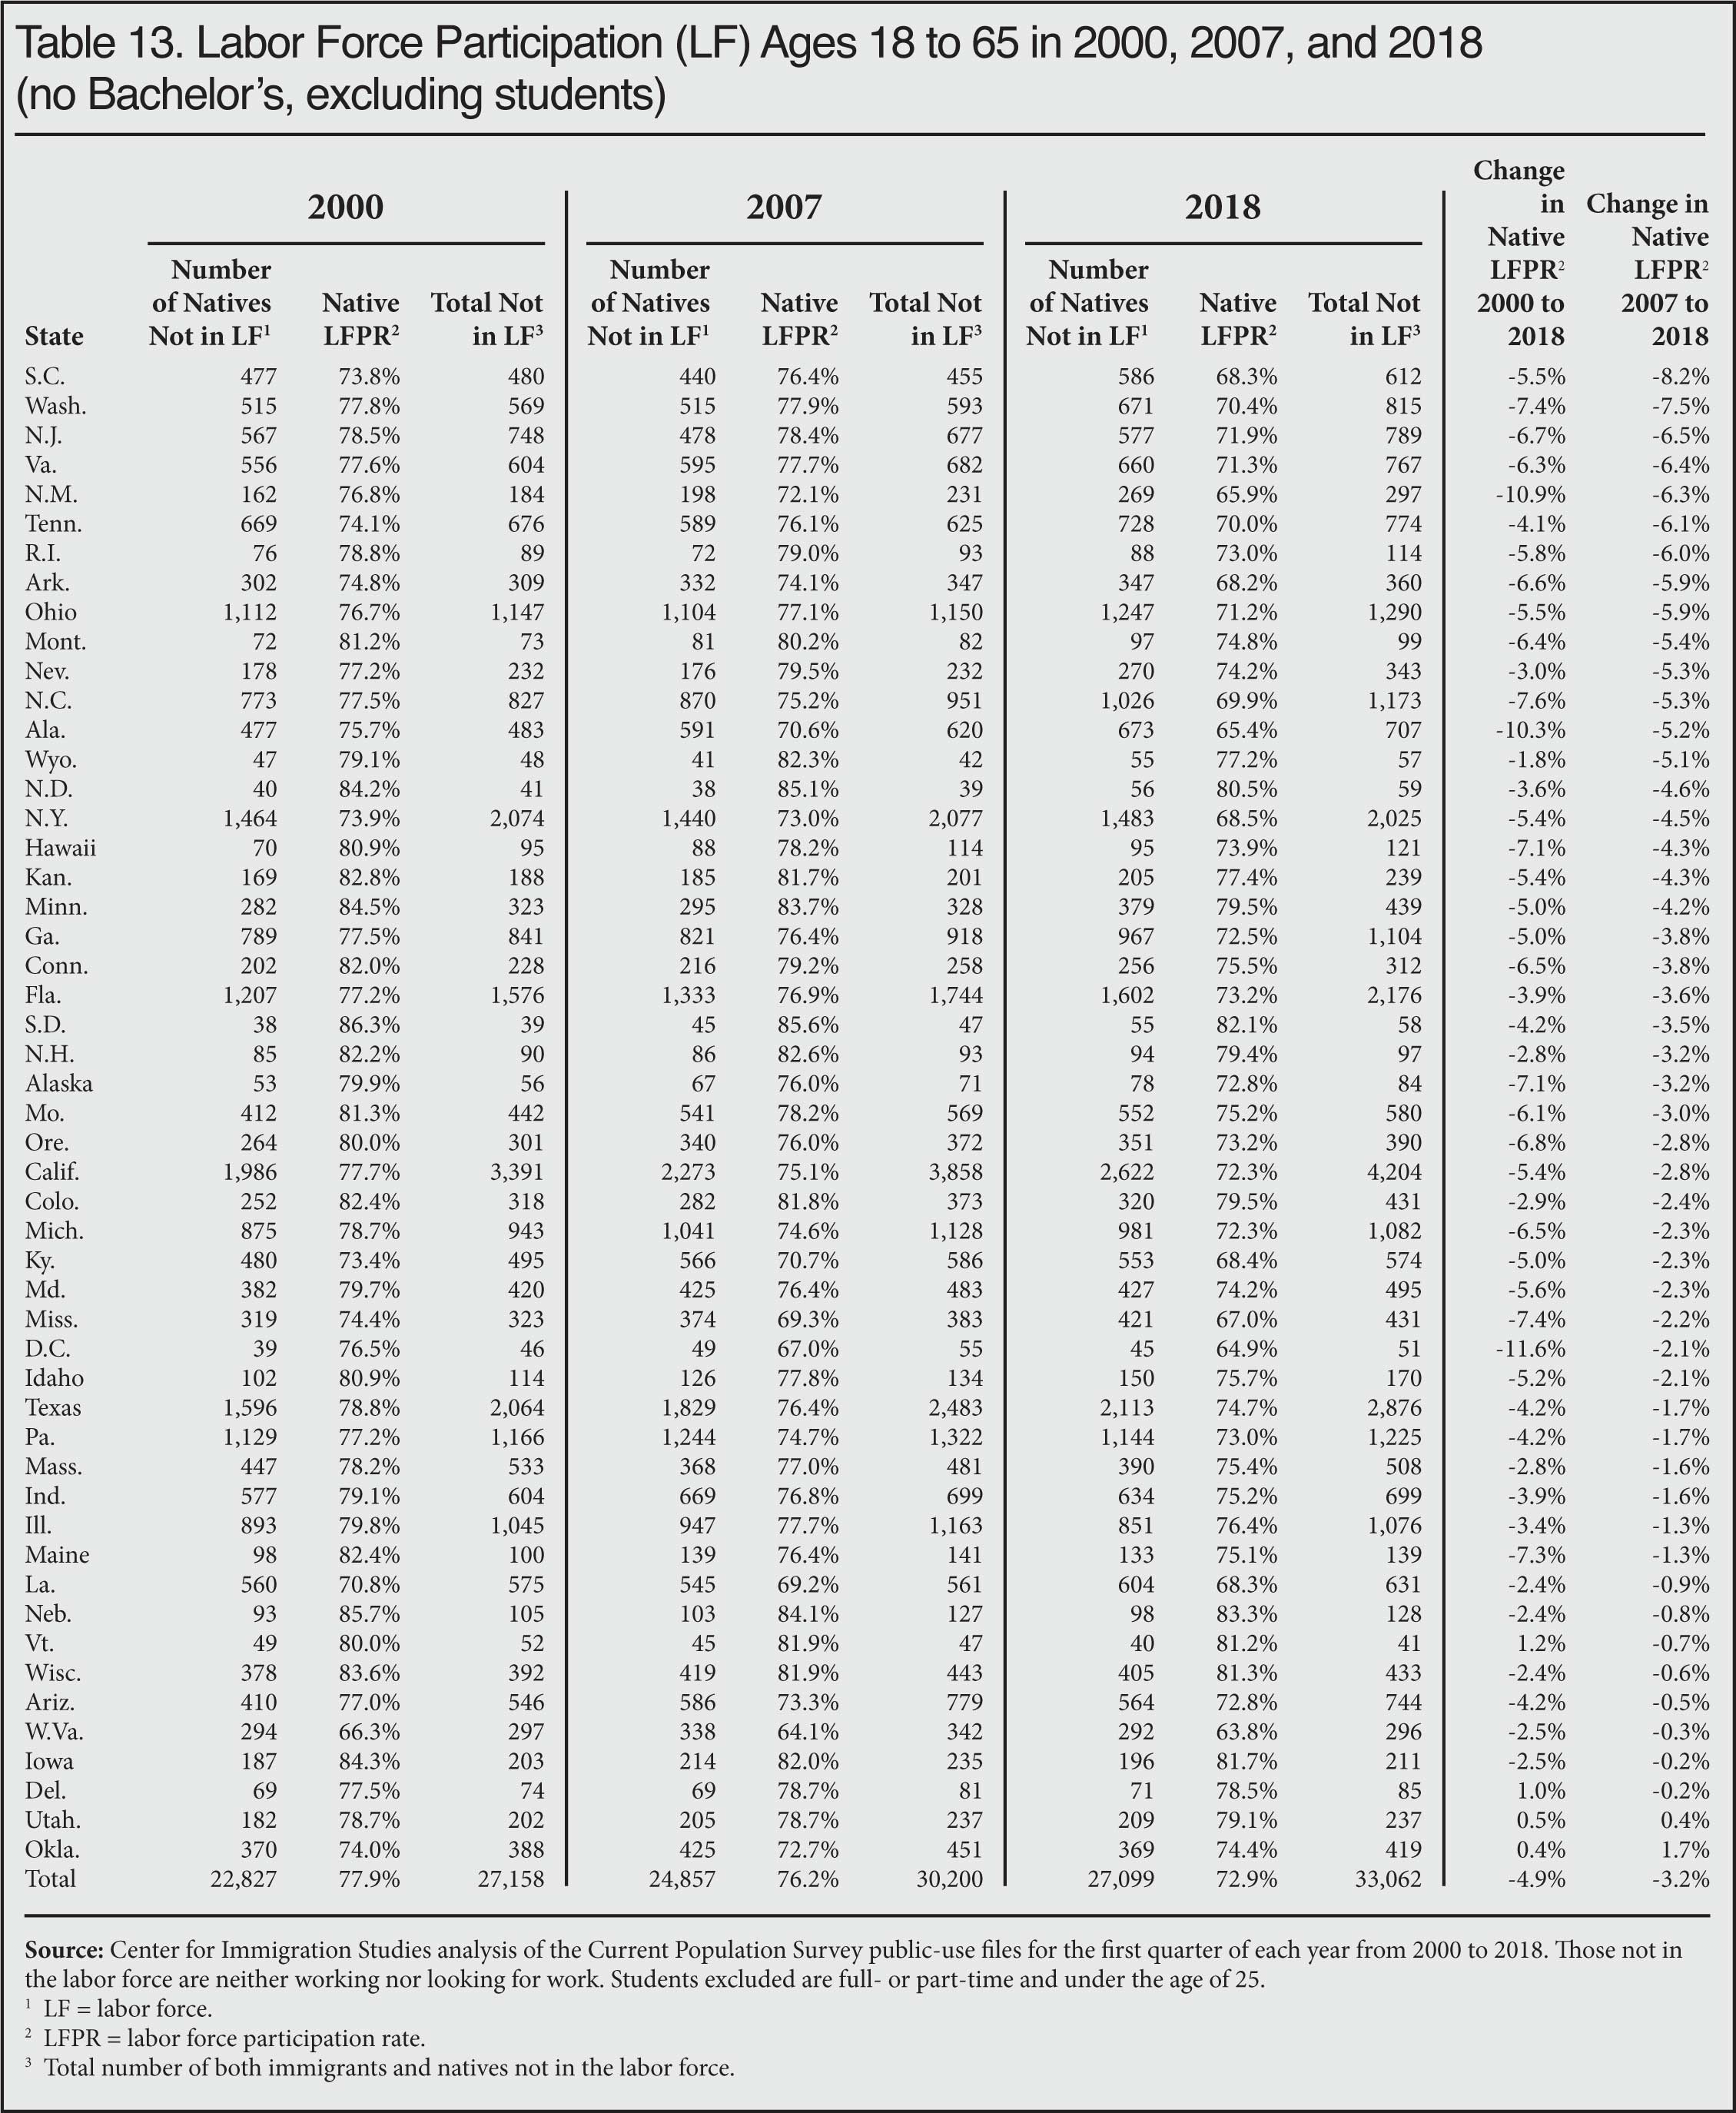 Table: Labor Force Participation (LF) Ages 18 to 65 in 2000, 2007, 2018 (no bachelors, excluding students)